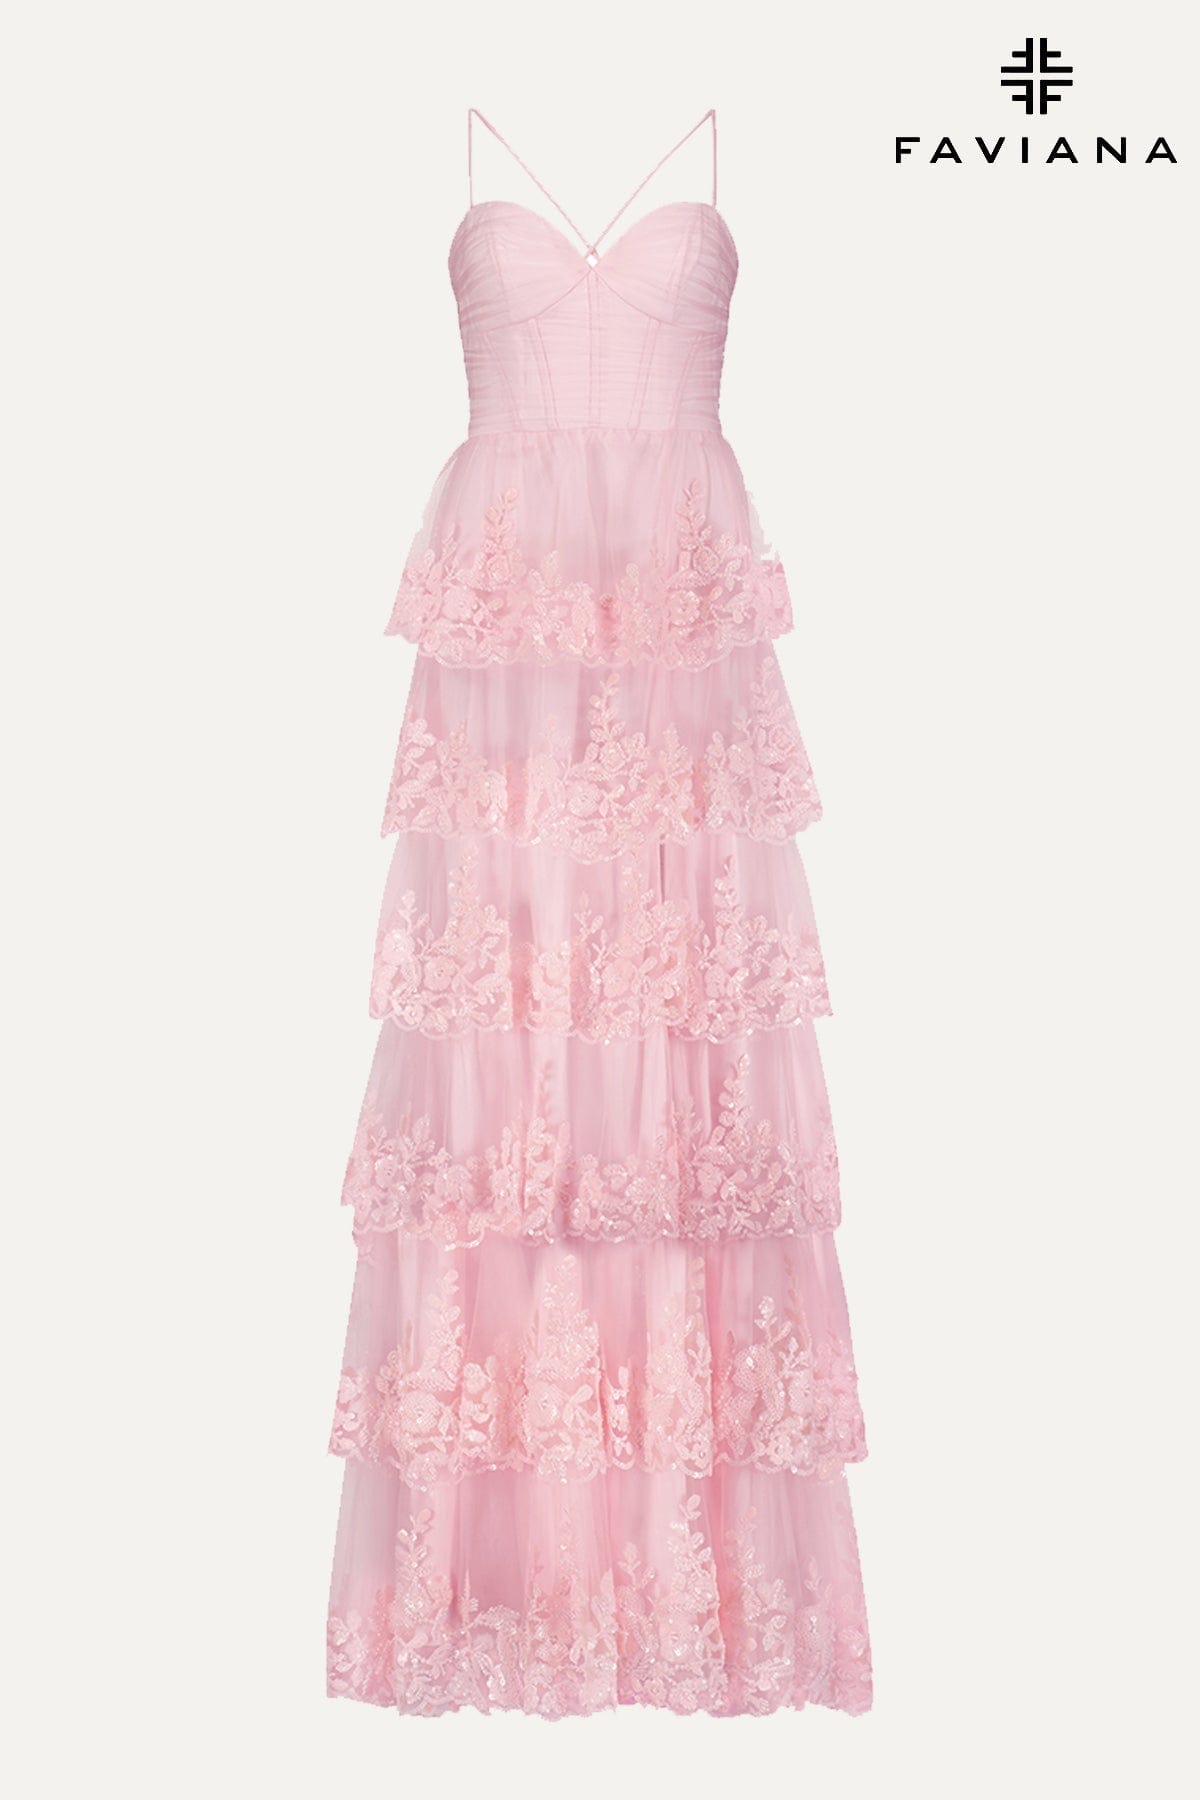 Light Pink Dress for Prom